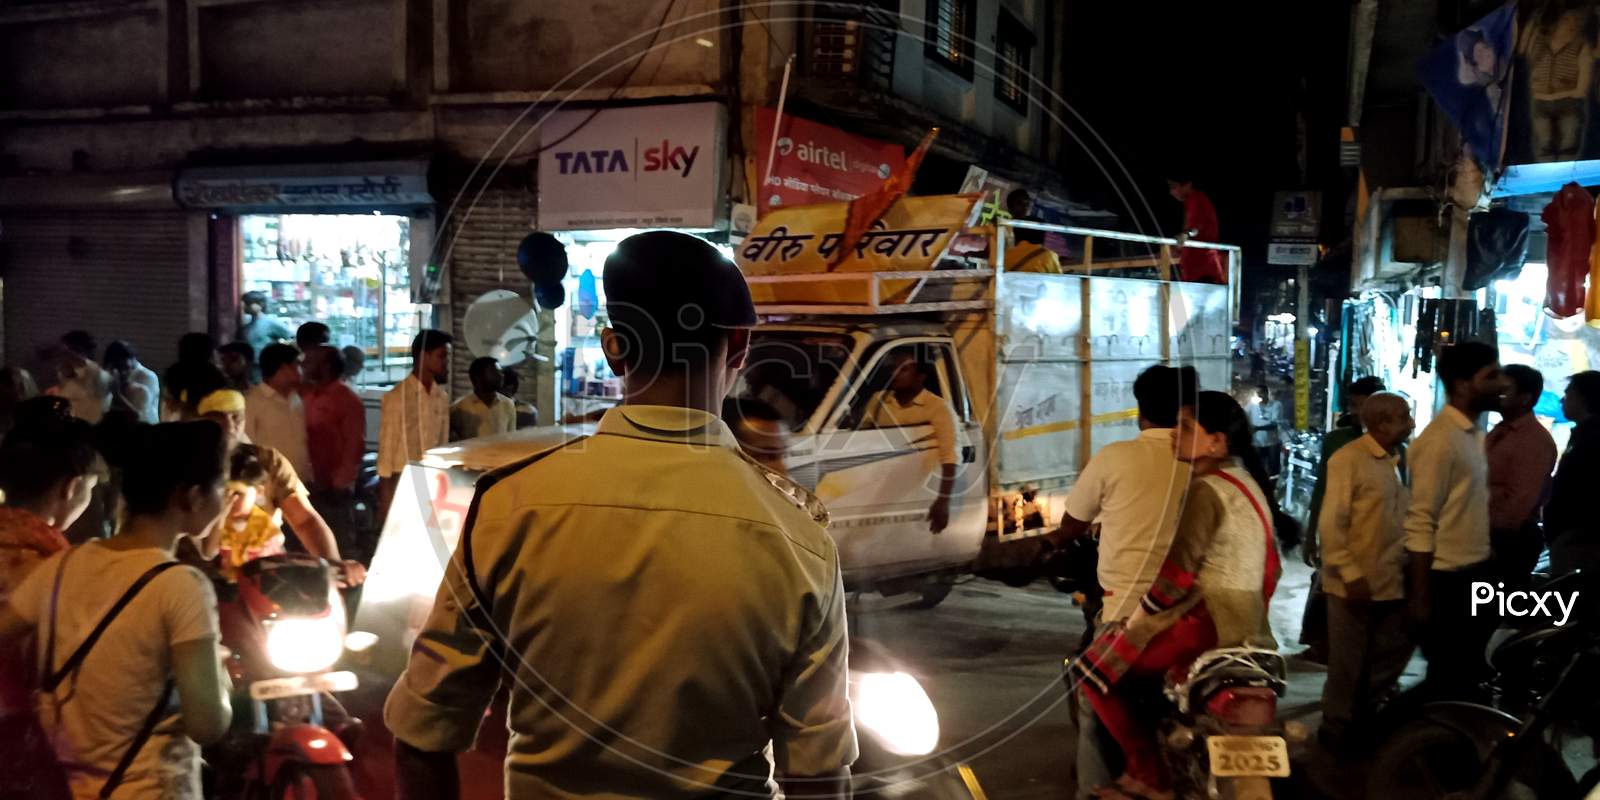 Indian Police On Duty.